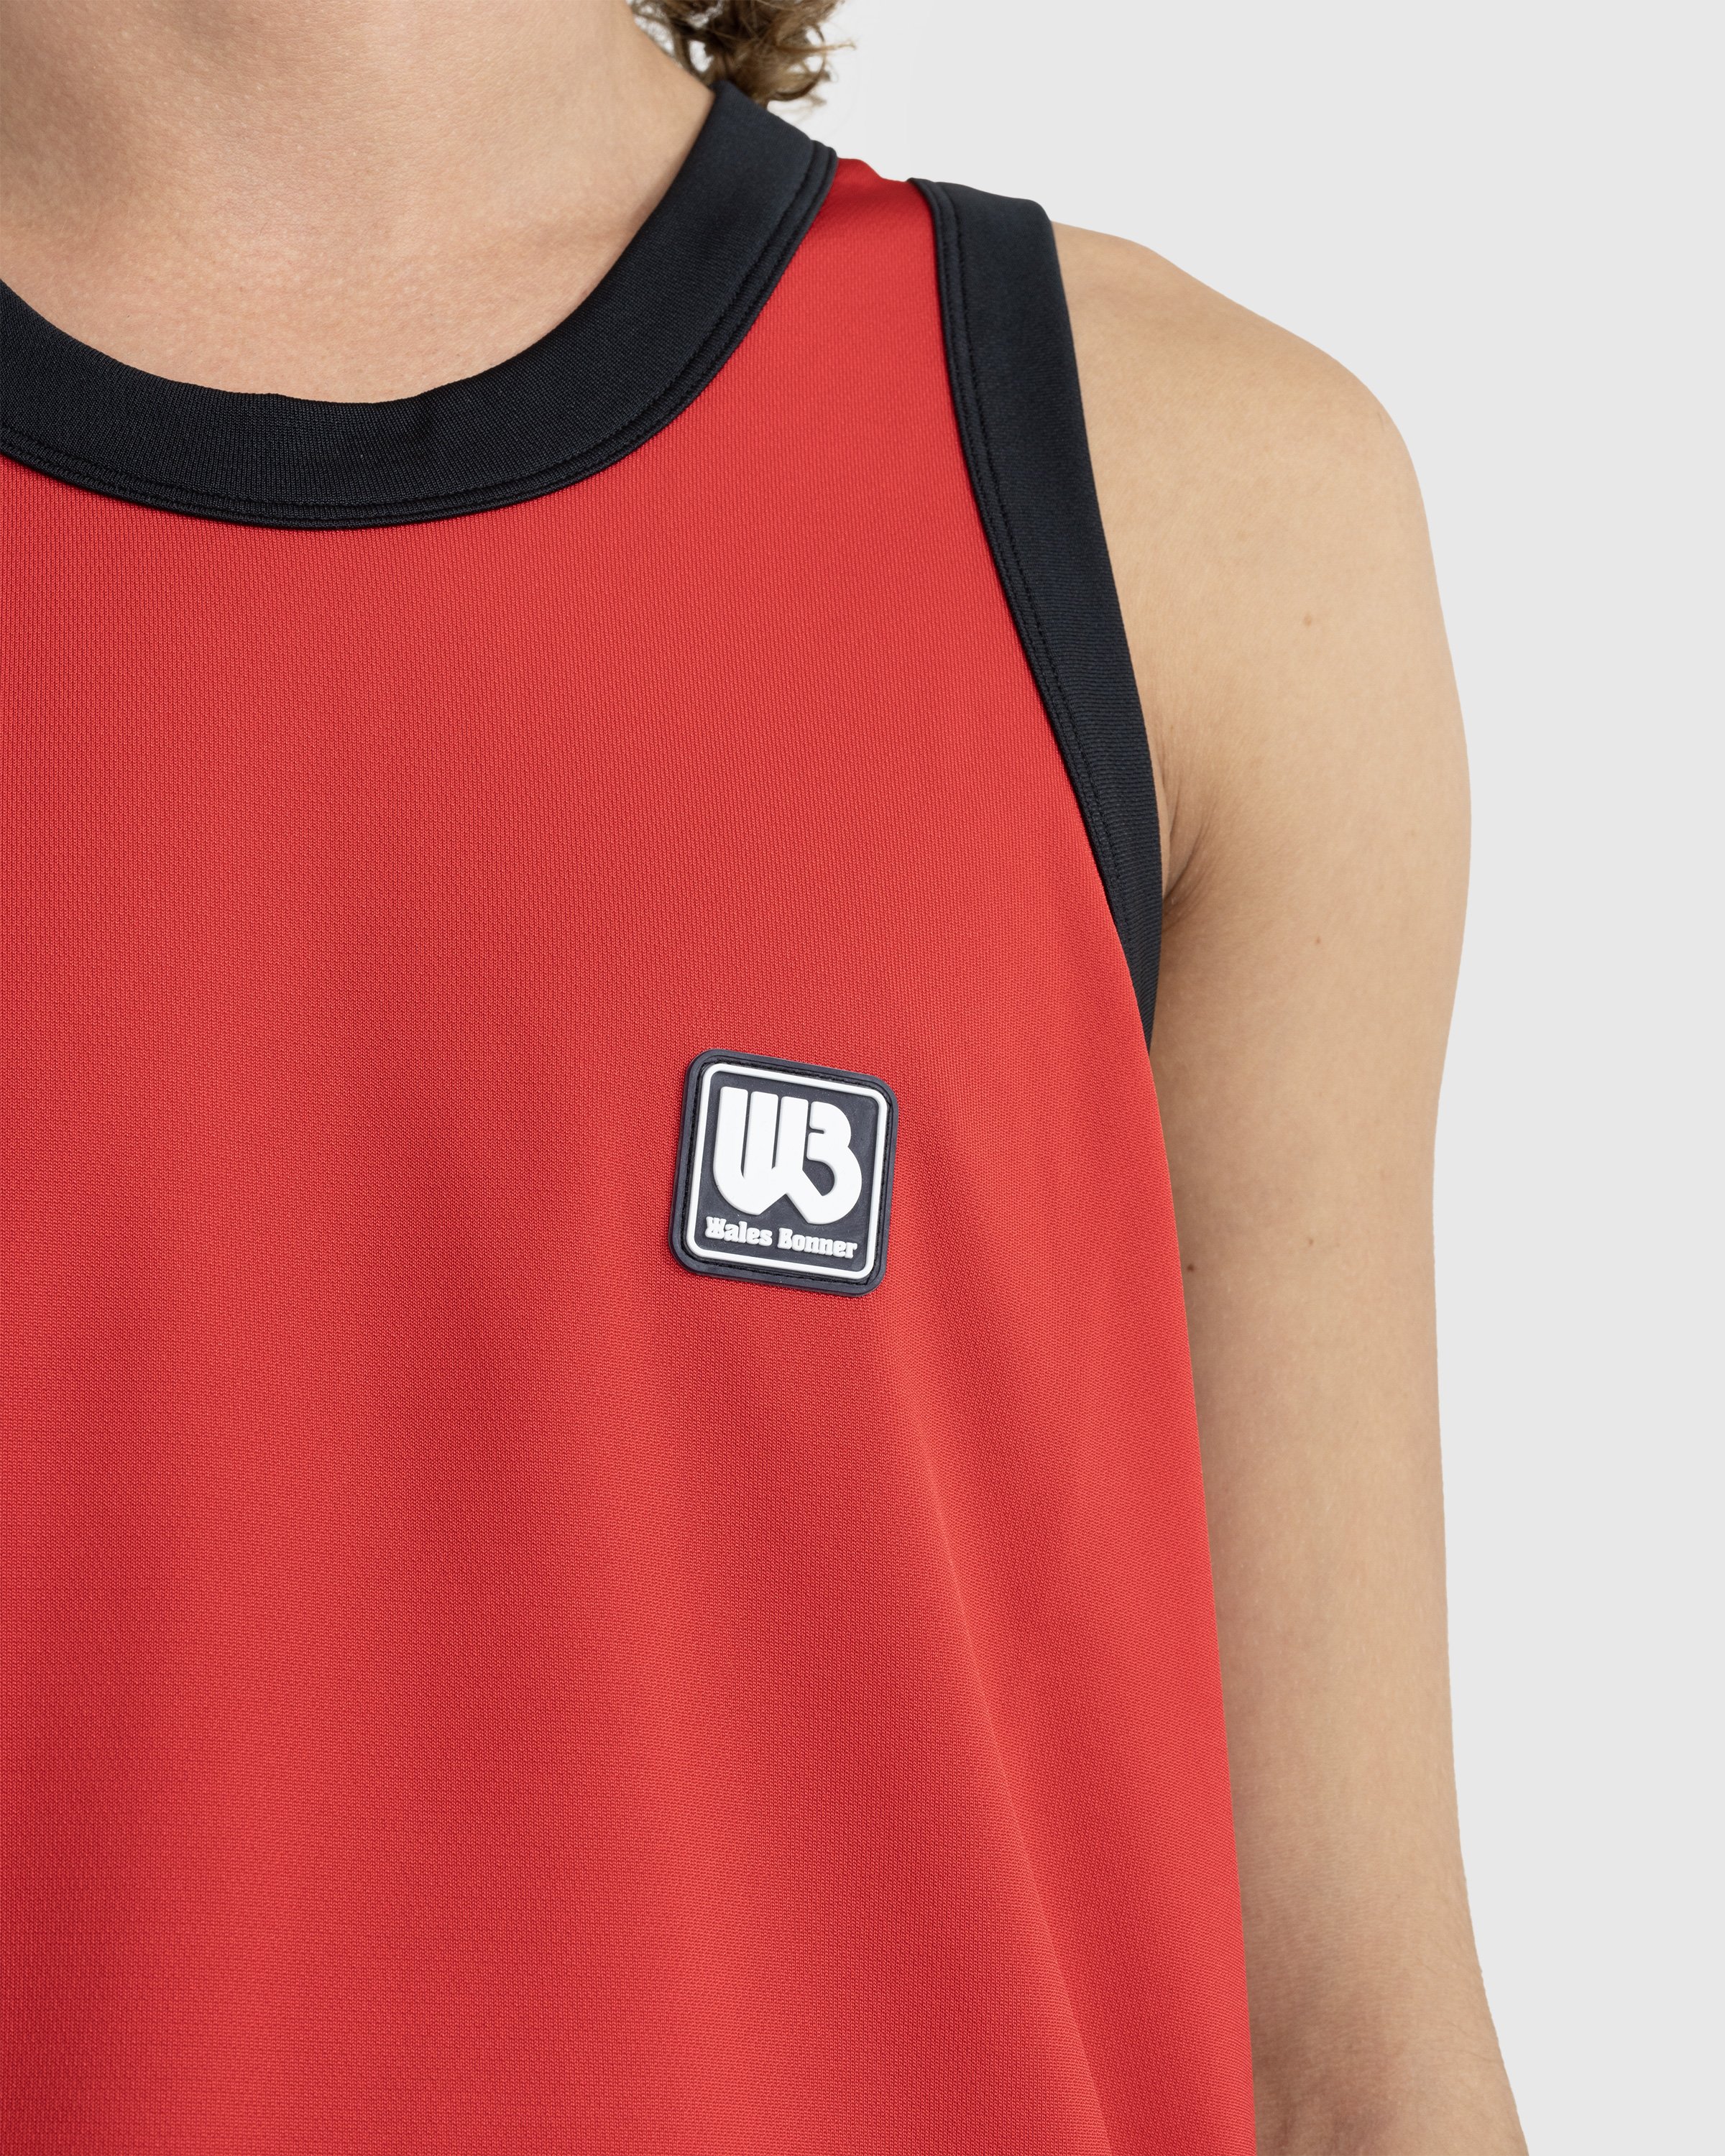 Wales Bonner - Diop Tank Top Red/Black - Clothing - Red - Image 7